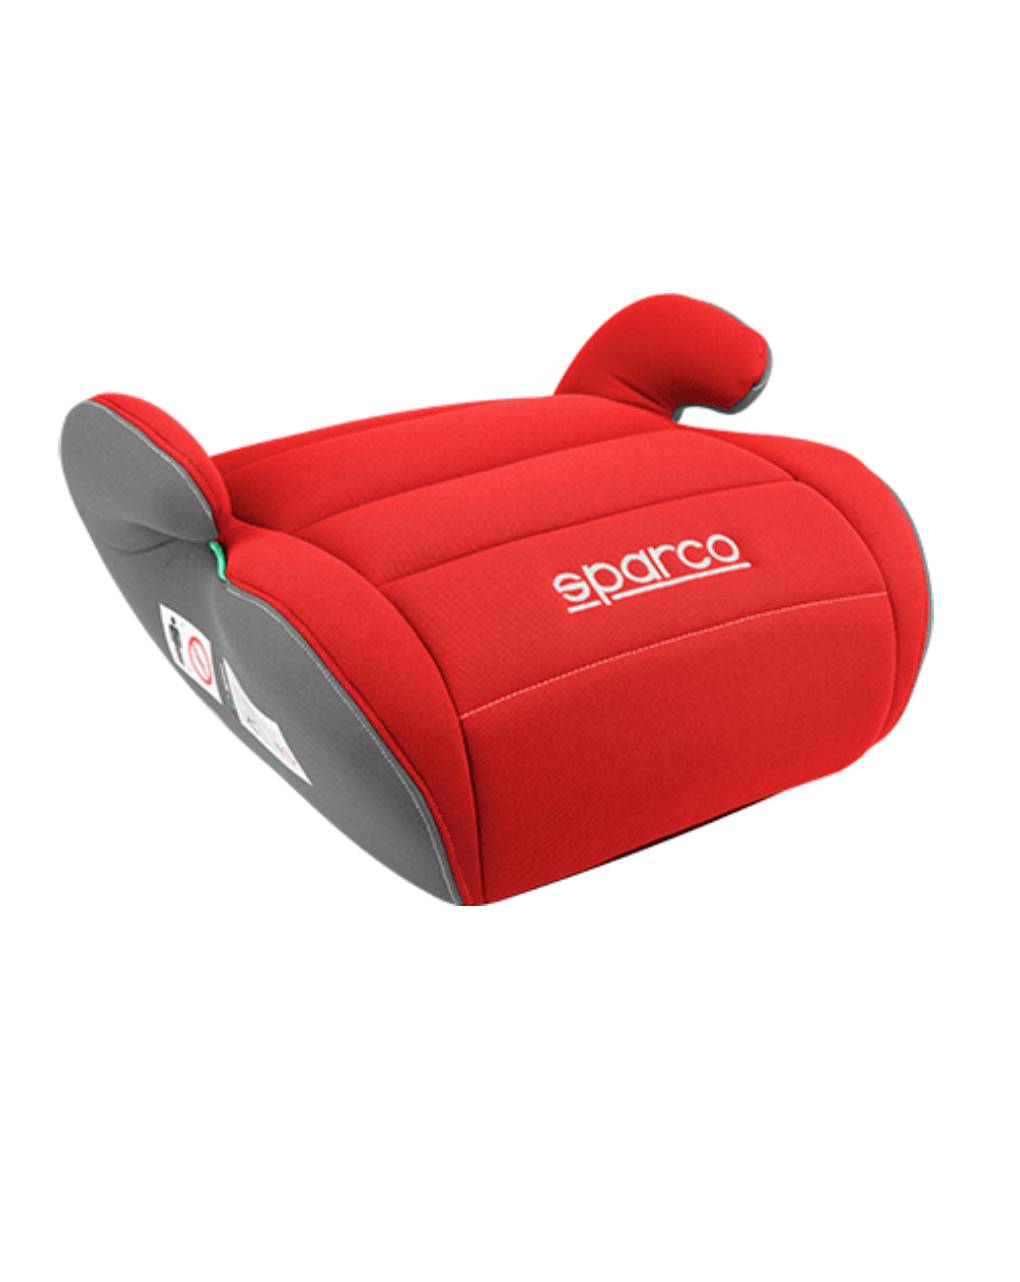 Sparco κάθισμα αυτοκινήτου booster i size red grey - SPARCO